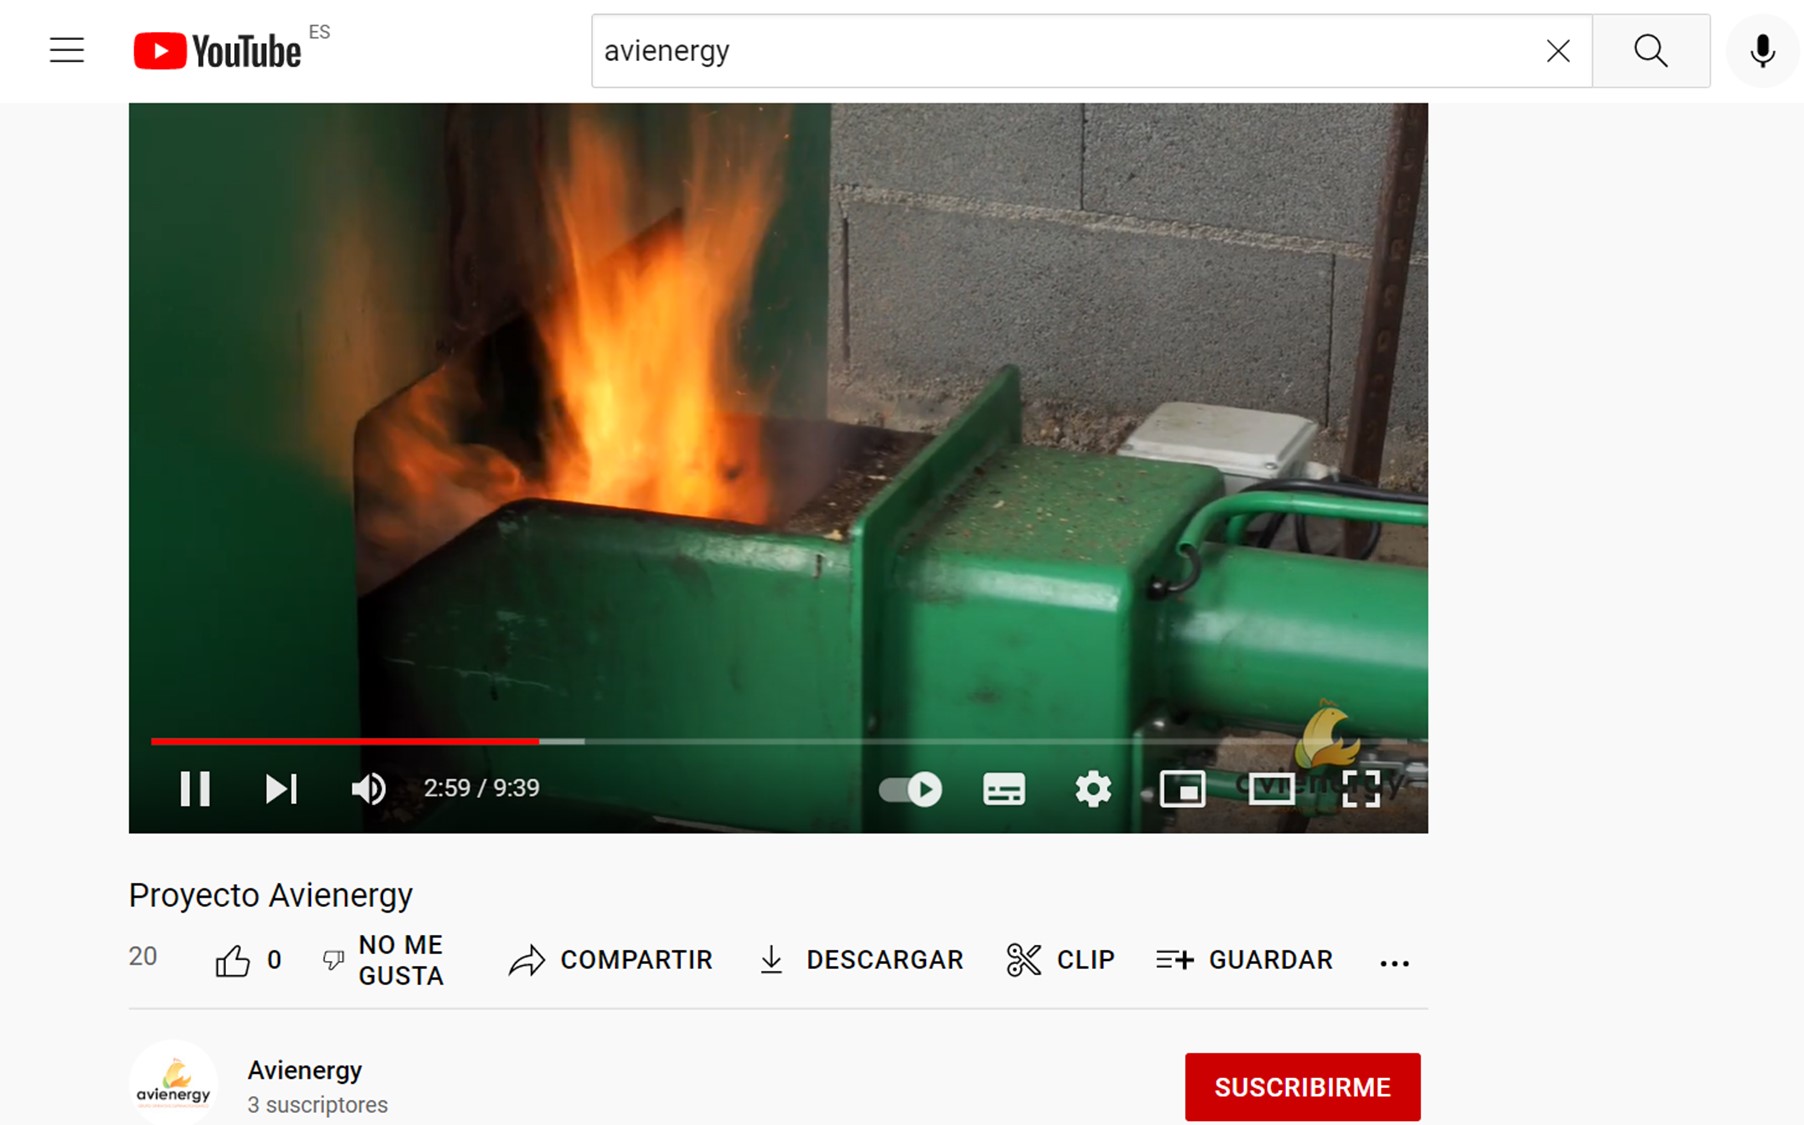 The AVIENERGY dissemination video, now available